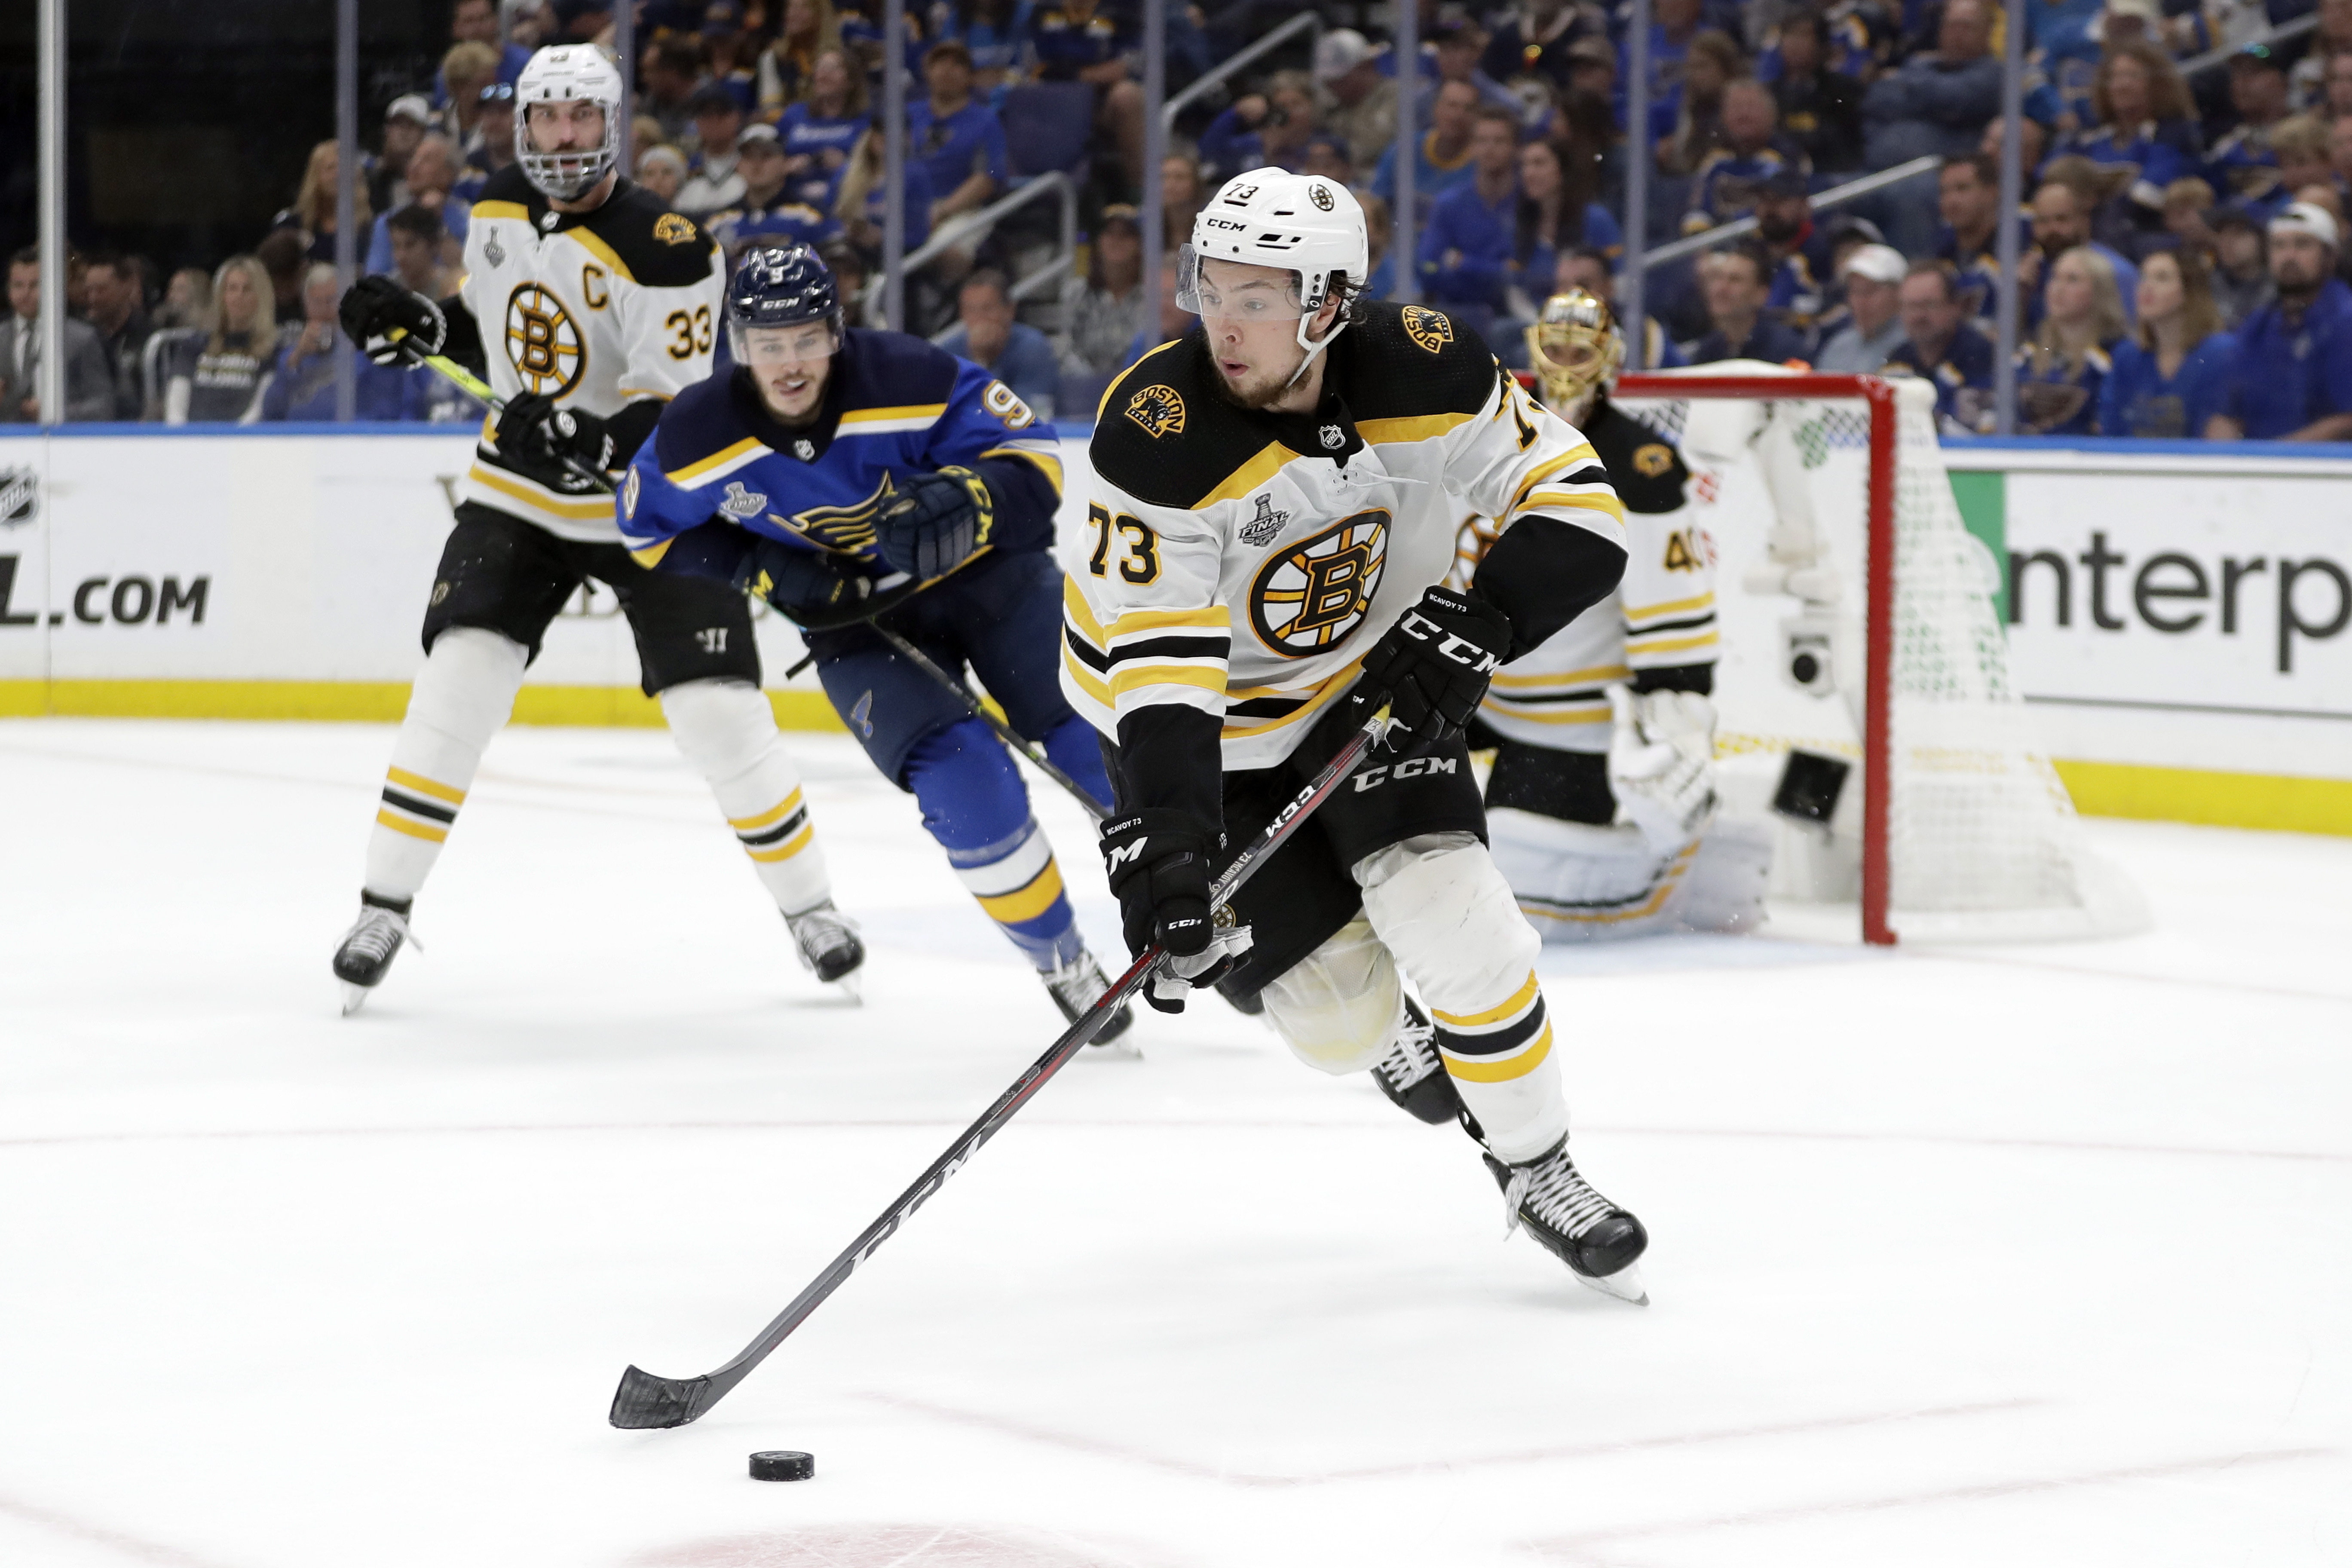 Bruins top Blues in Stanley Cup Final revenge game